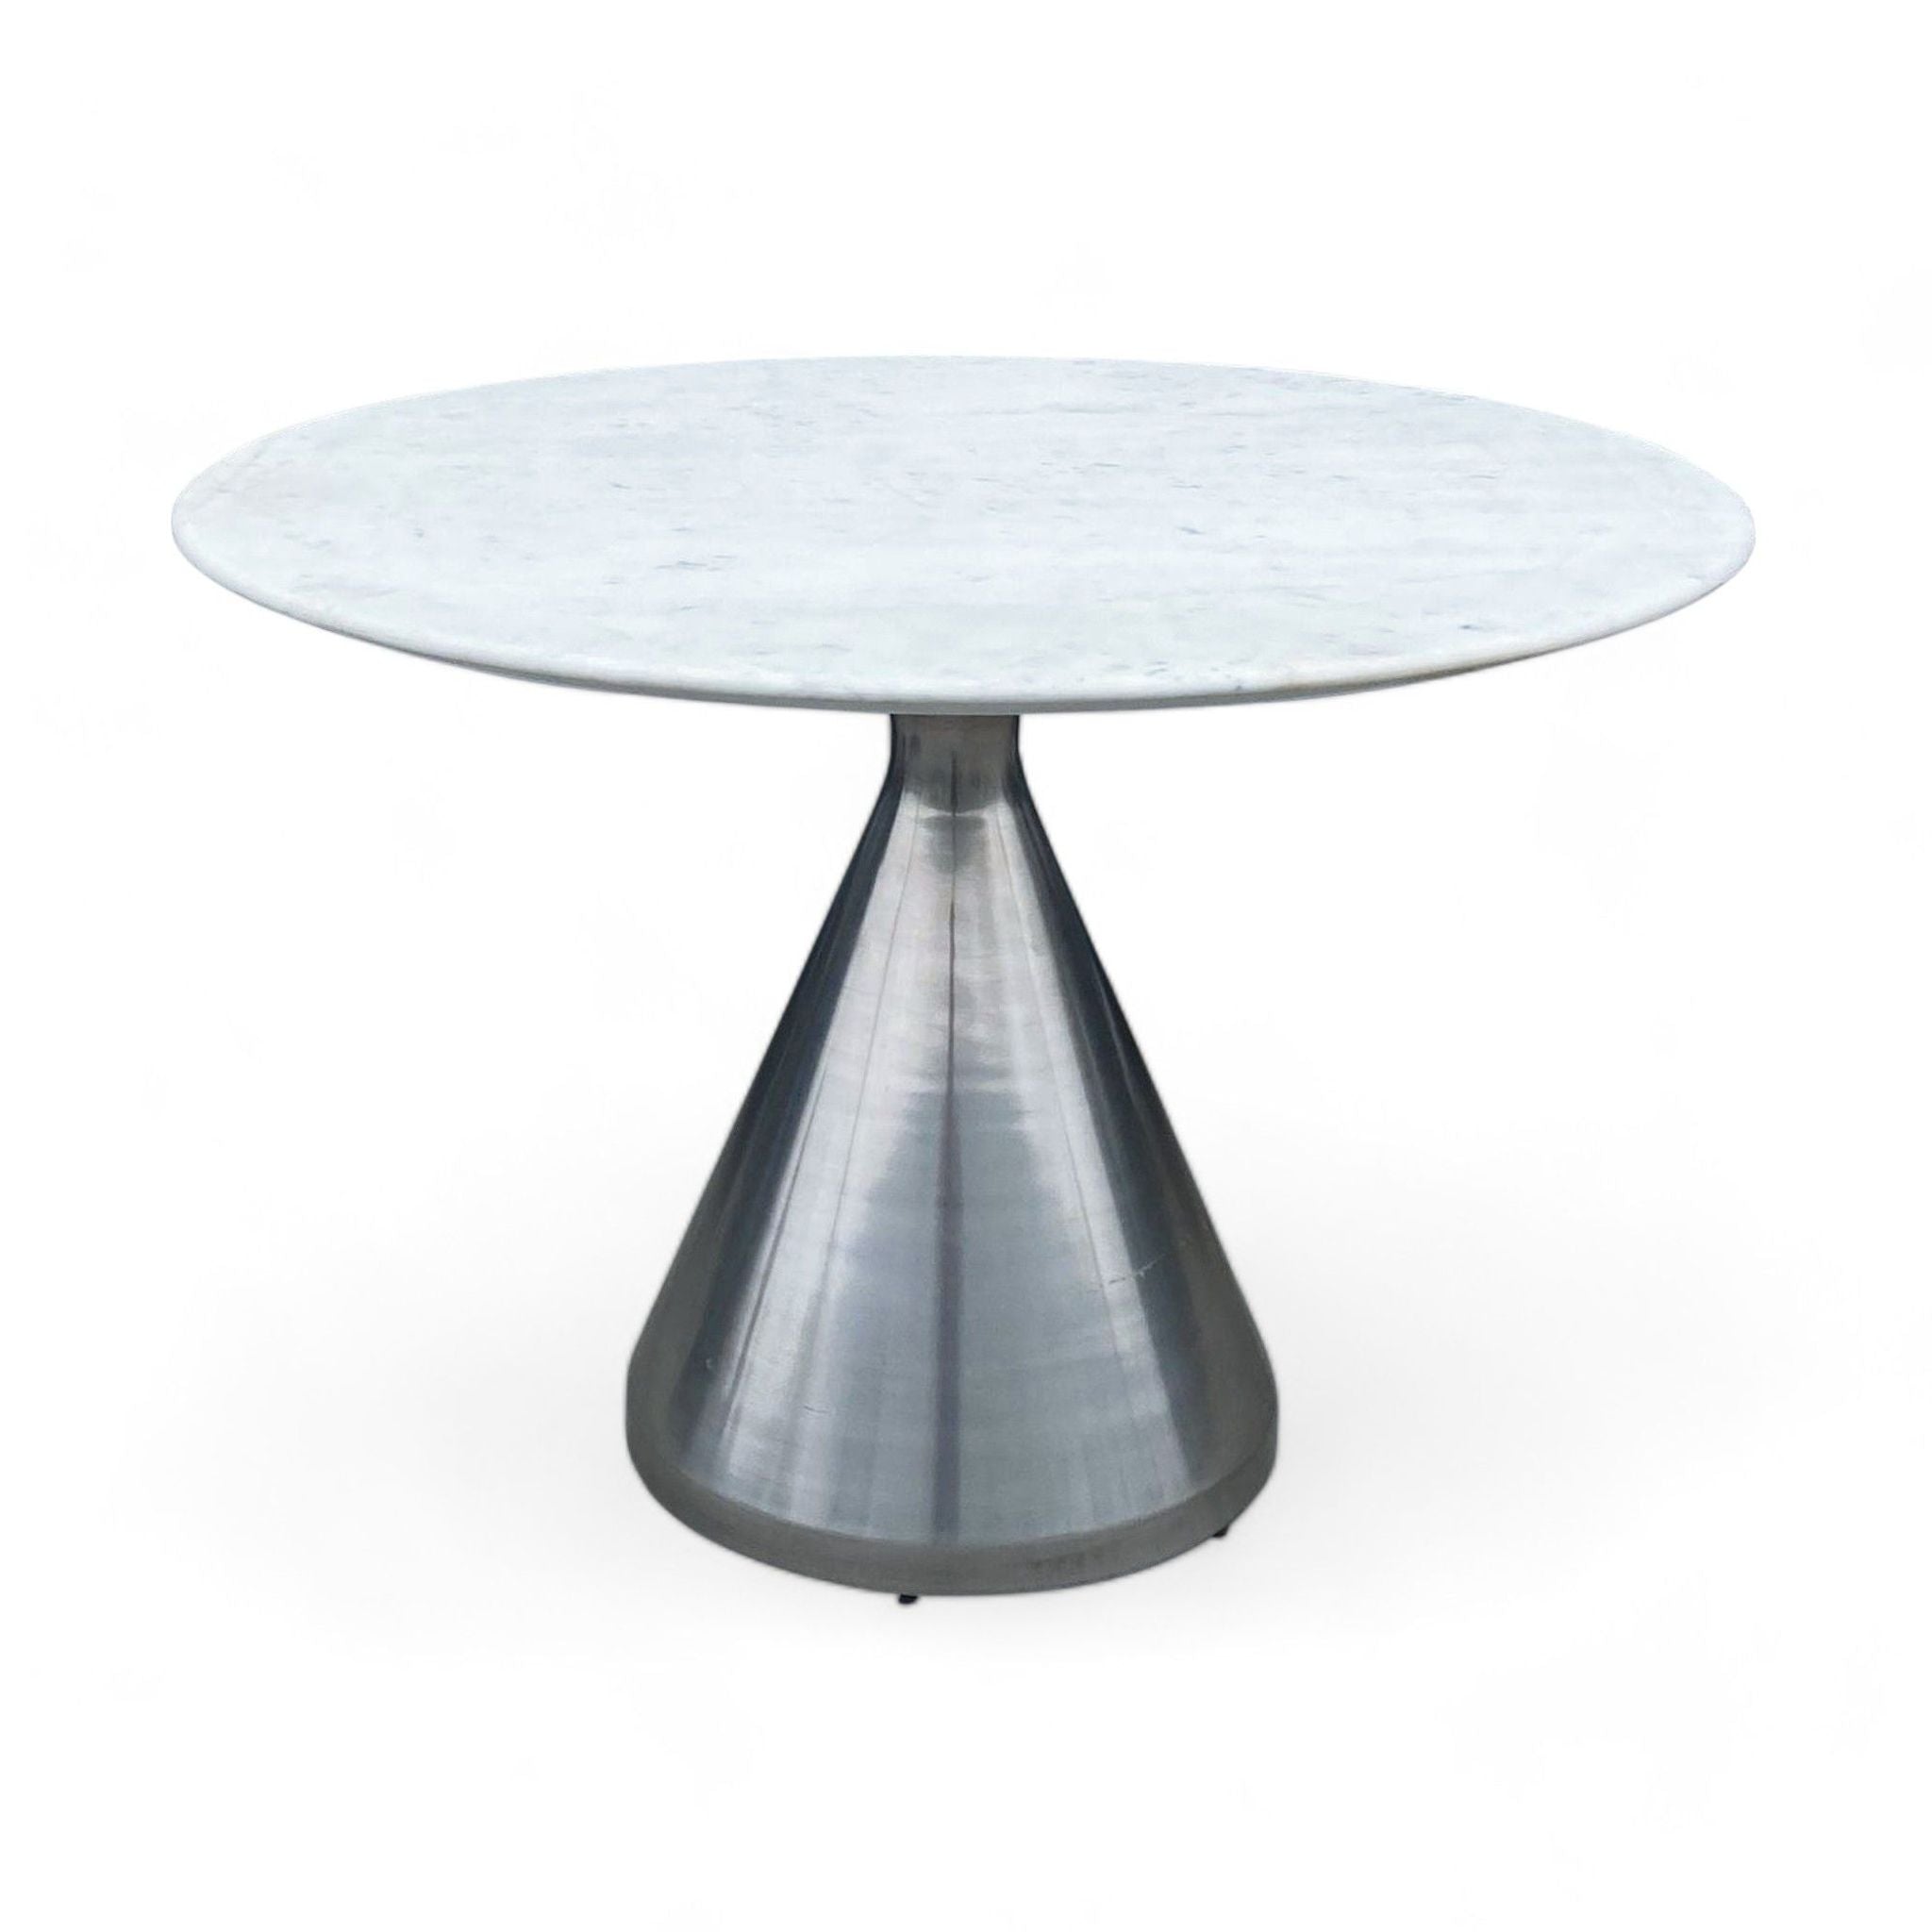 Contemporary Reperch dining table with white marble top and conical metal base.